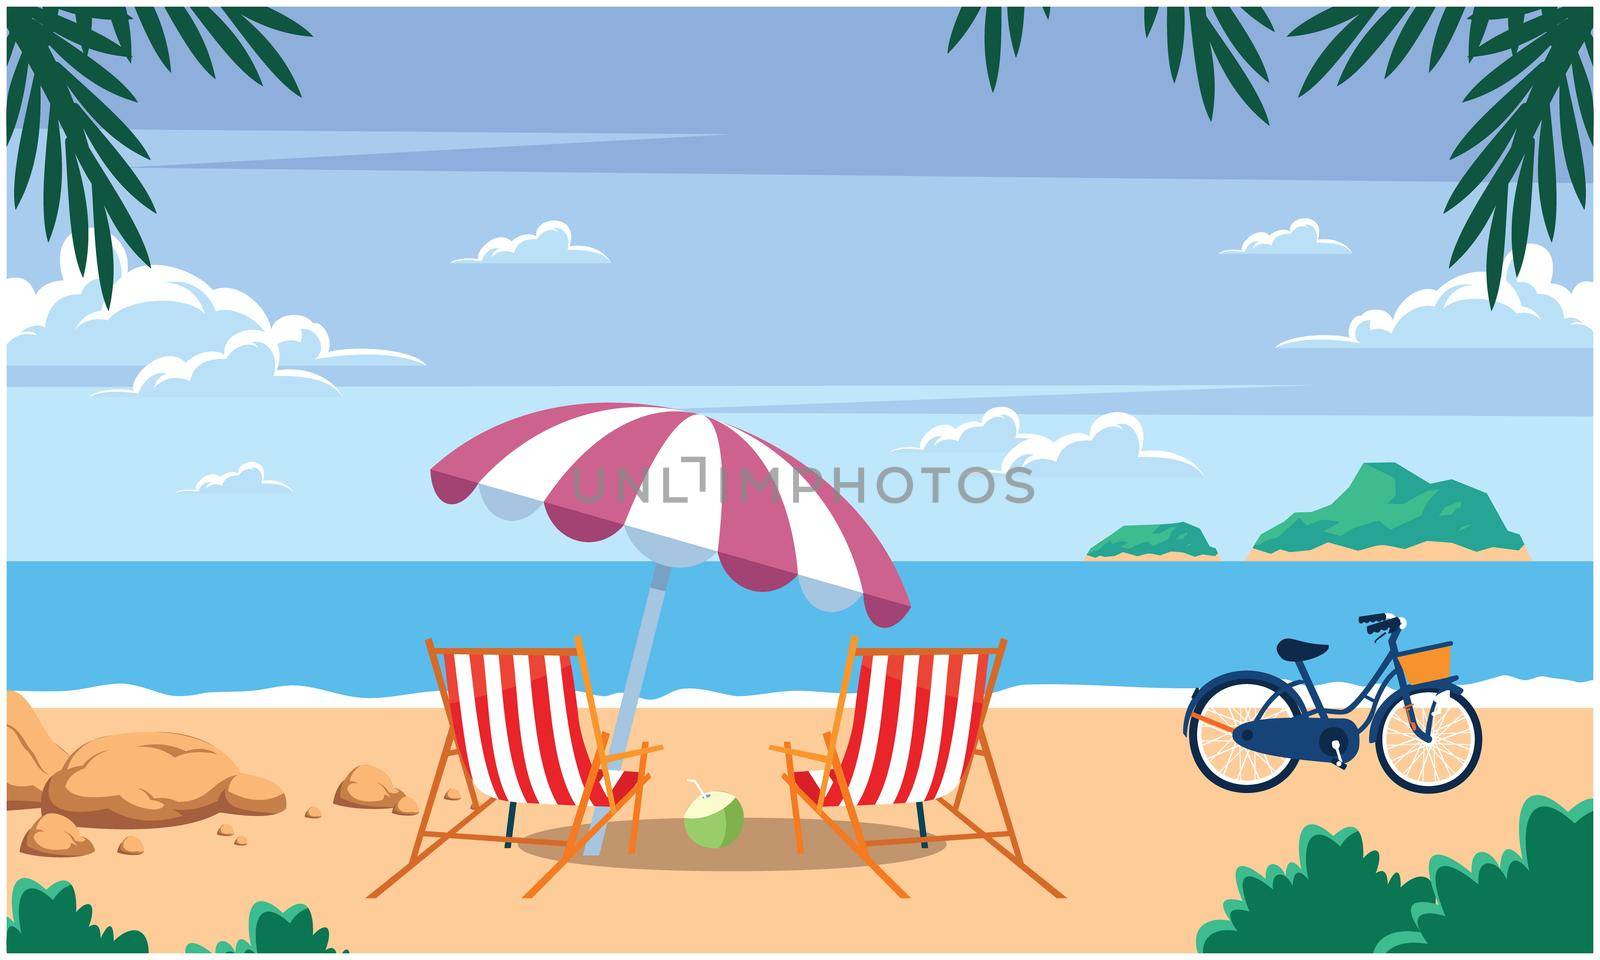 a sunny view of a beach with chair, umbrella, bicycle and coconut